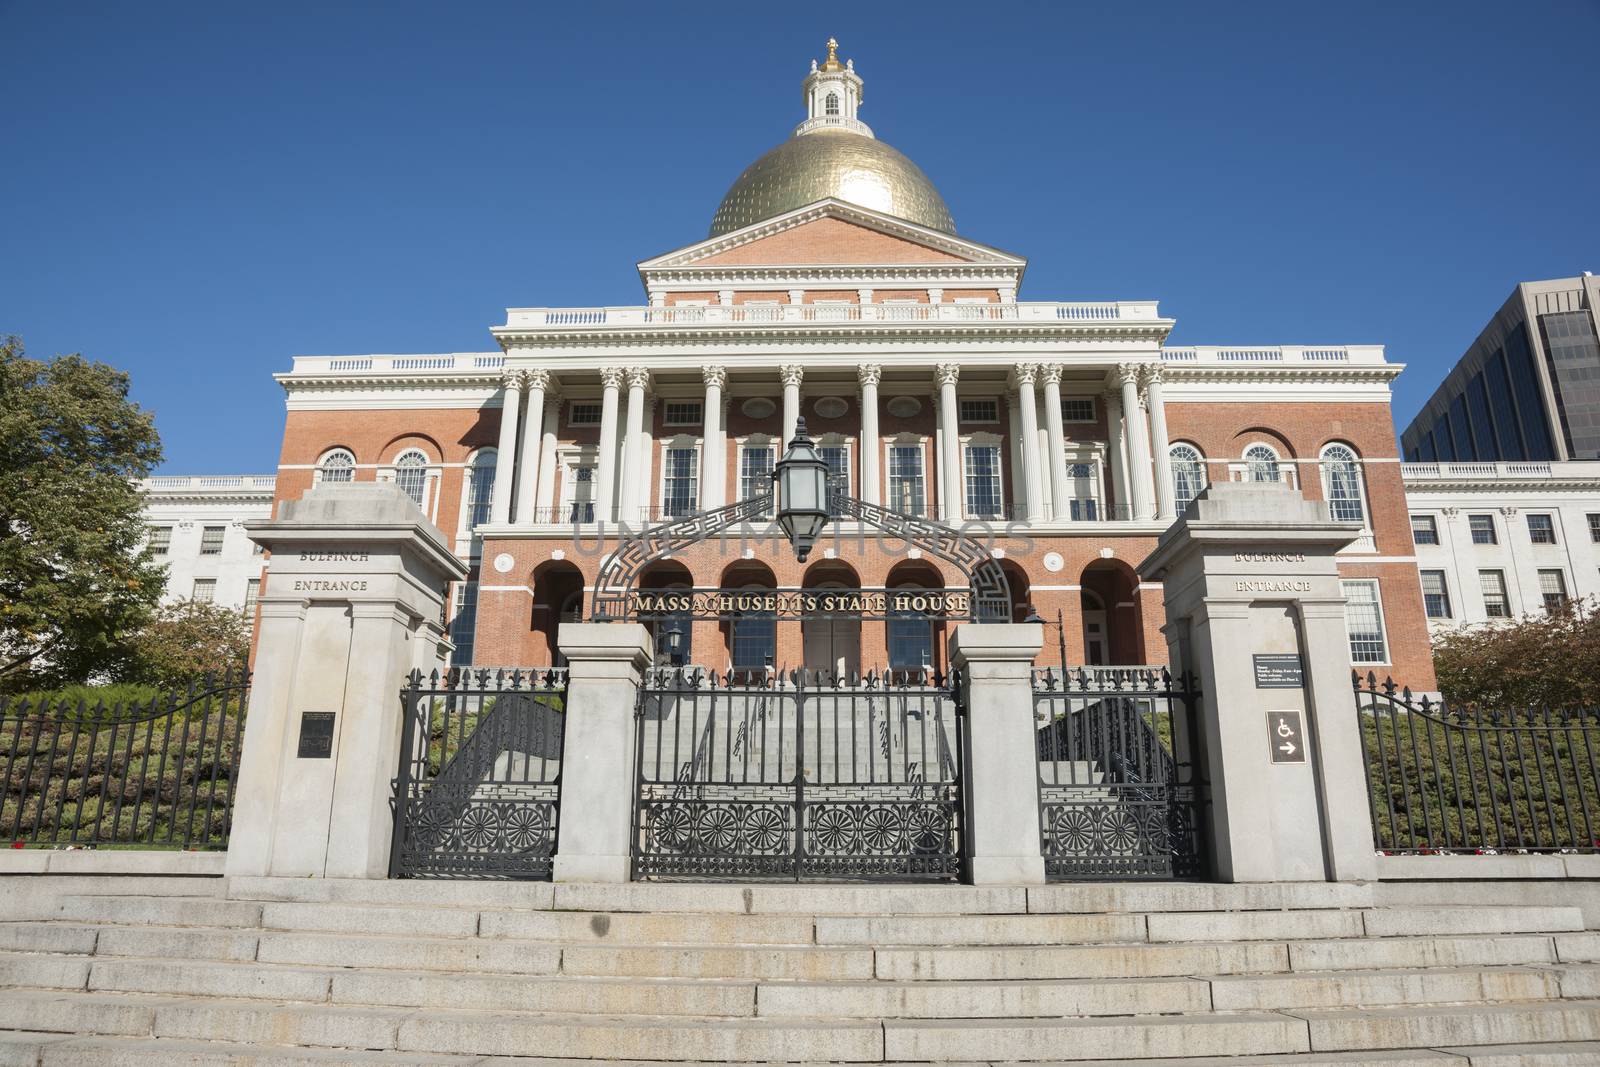 Massachusetts State House is the state capitol and house of government of the state of Massachusetts, the Bullfinch Entrance gate. by brians101